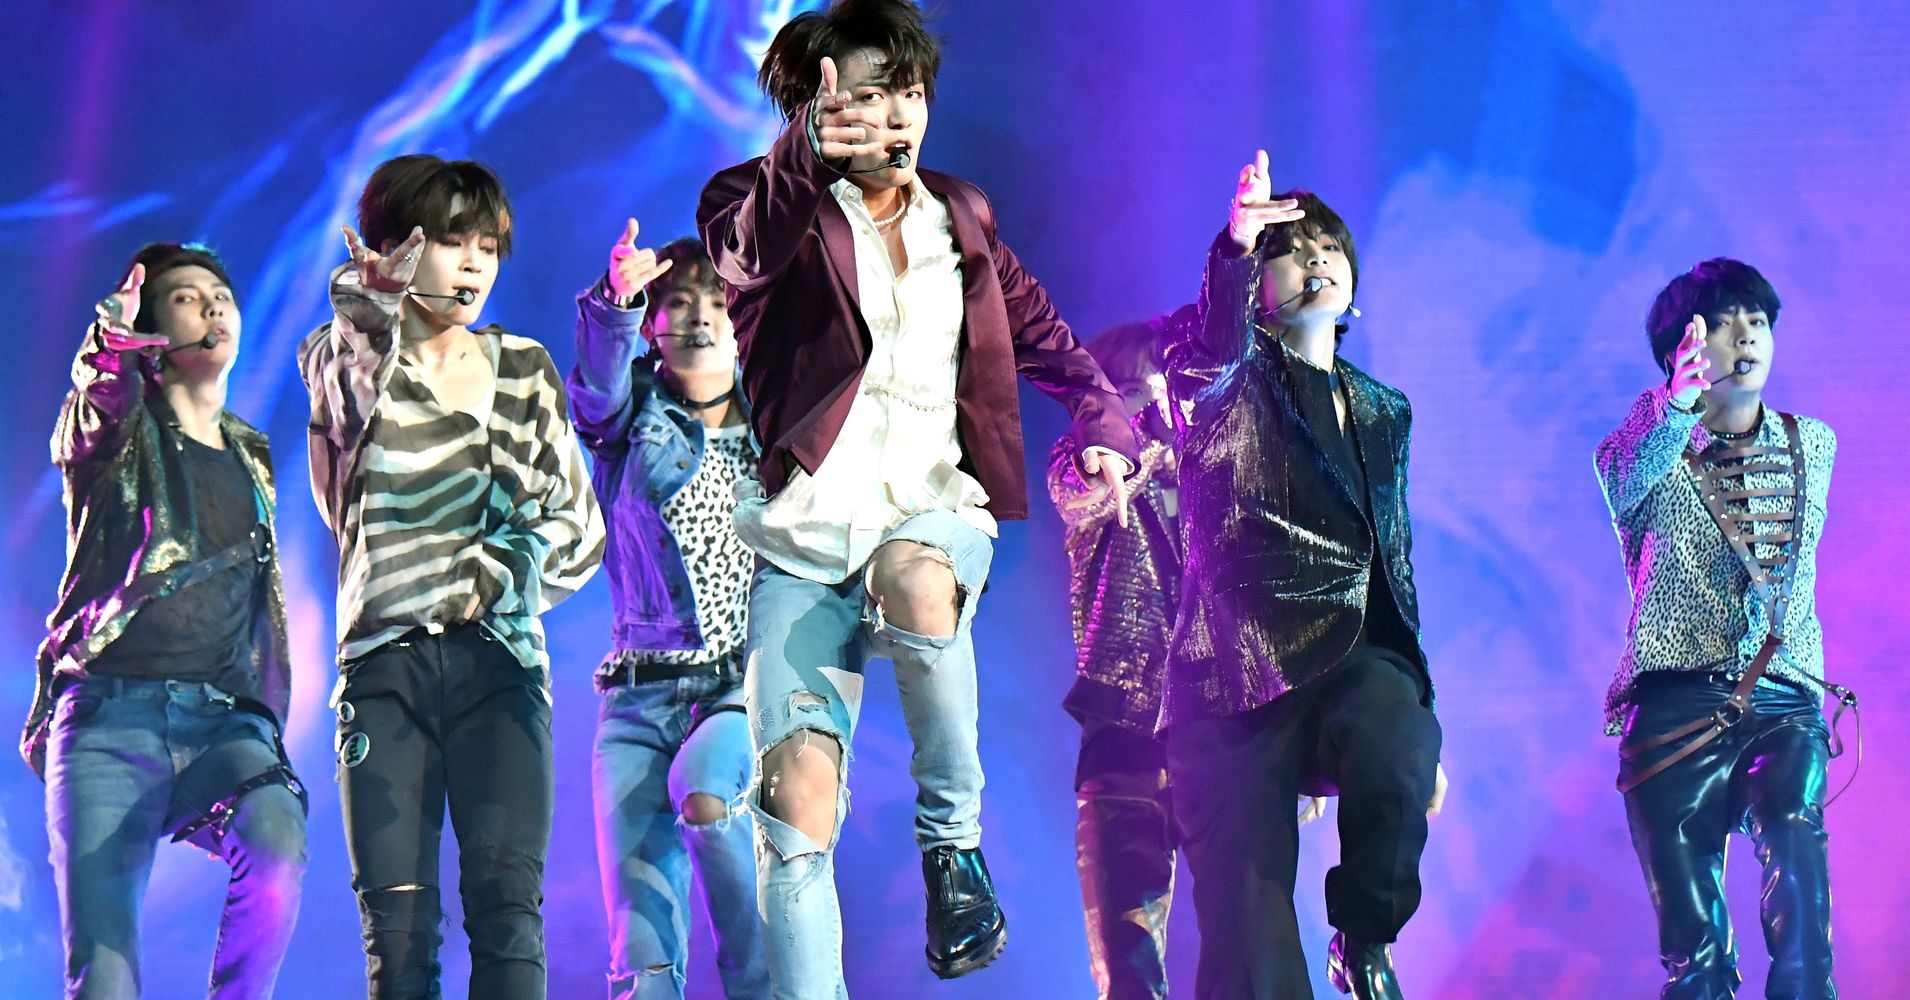 KPop Band BTS Slays Performance At Billboard Music Awards Because Theyre BTS  HuffPost